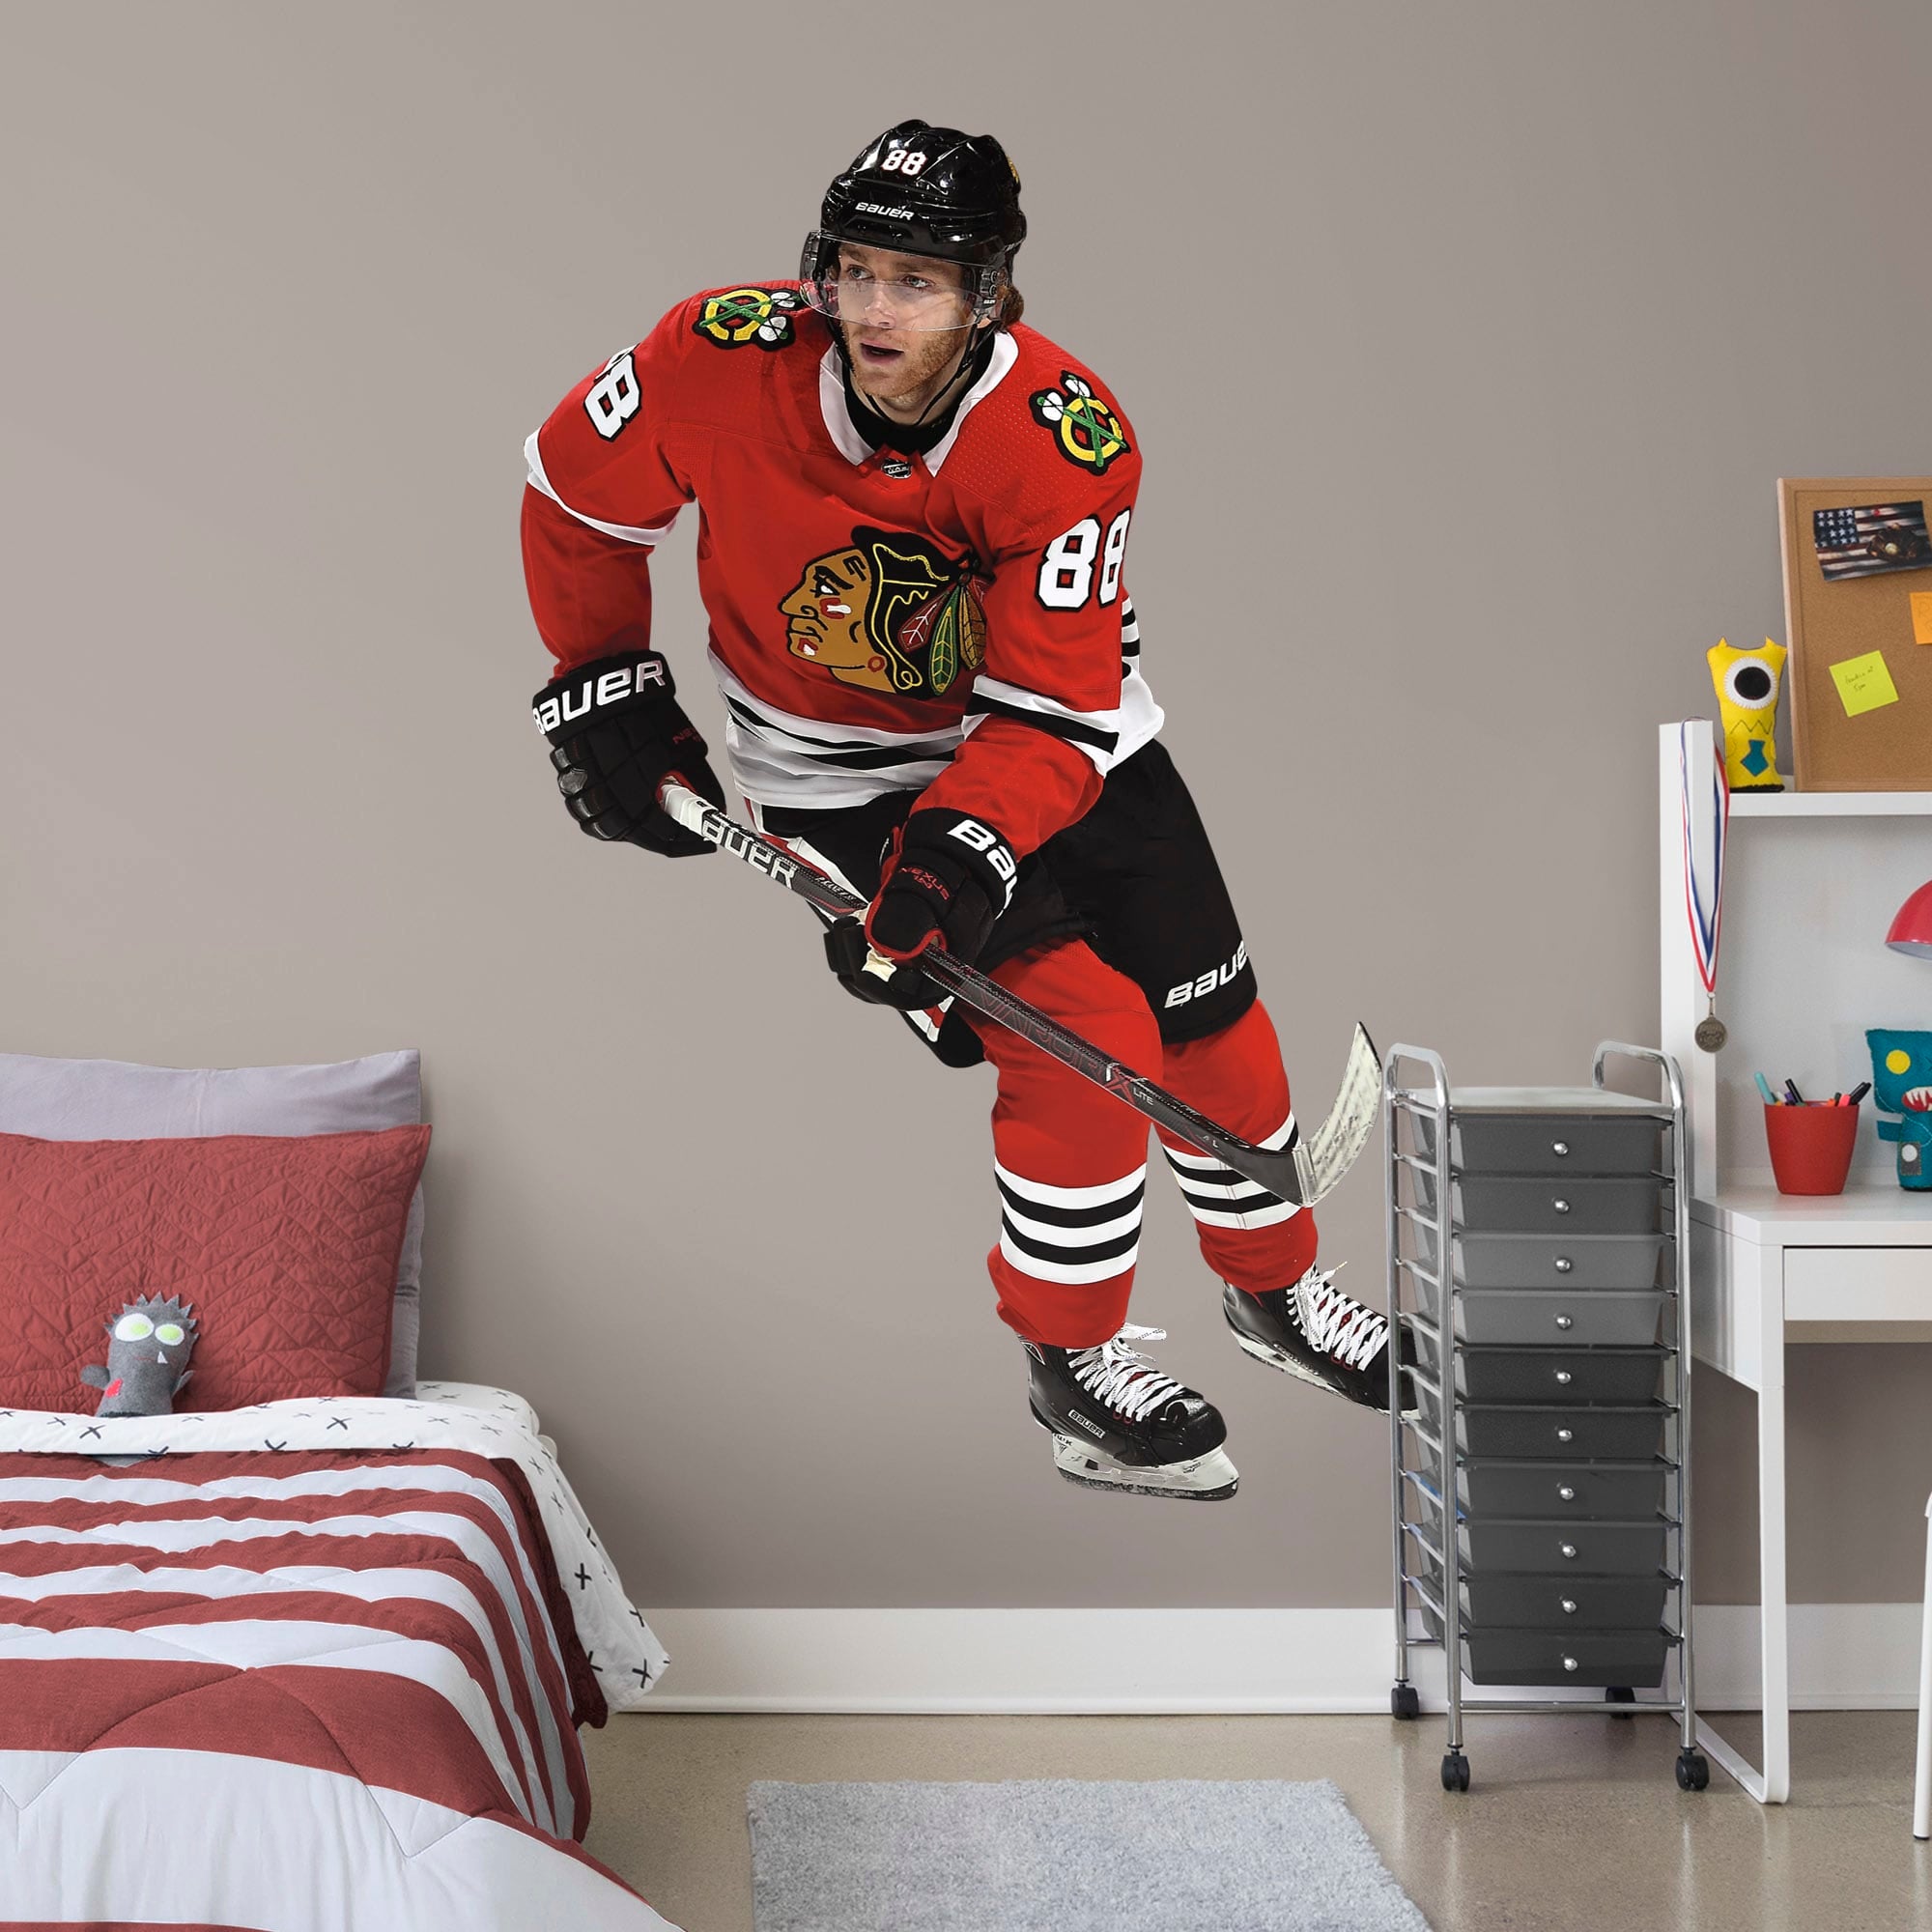 Patrick Kane for Chicago Blackhawks: Home - Officially Licensed NHL Removable Wall Decal Large by Fathead | Vinyl